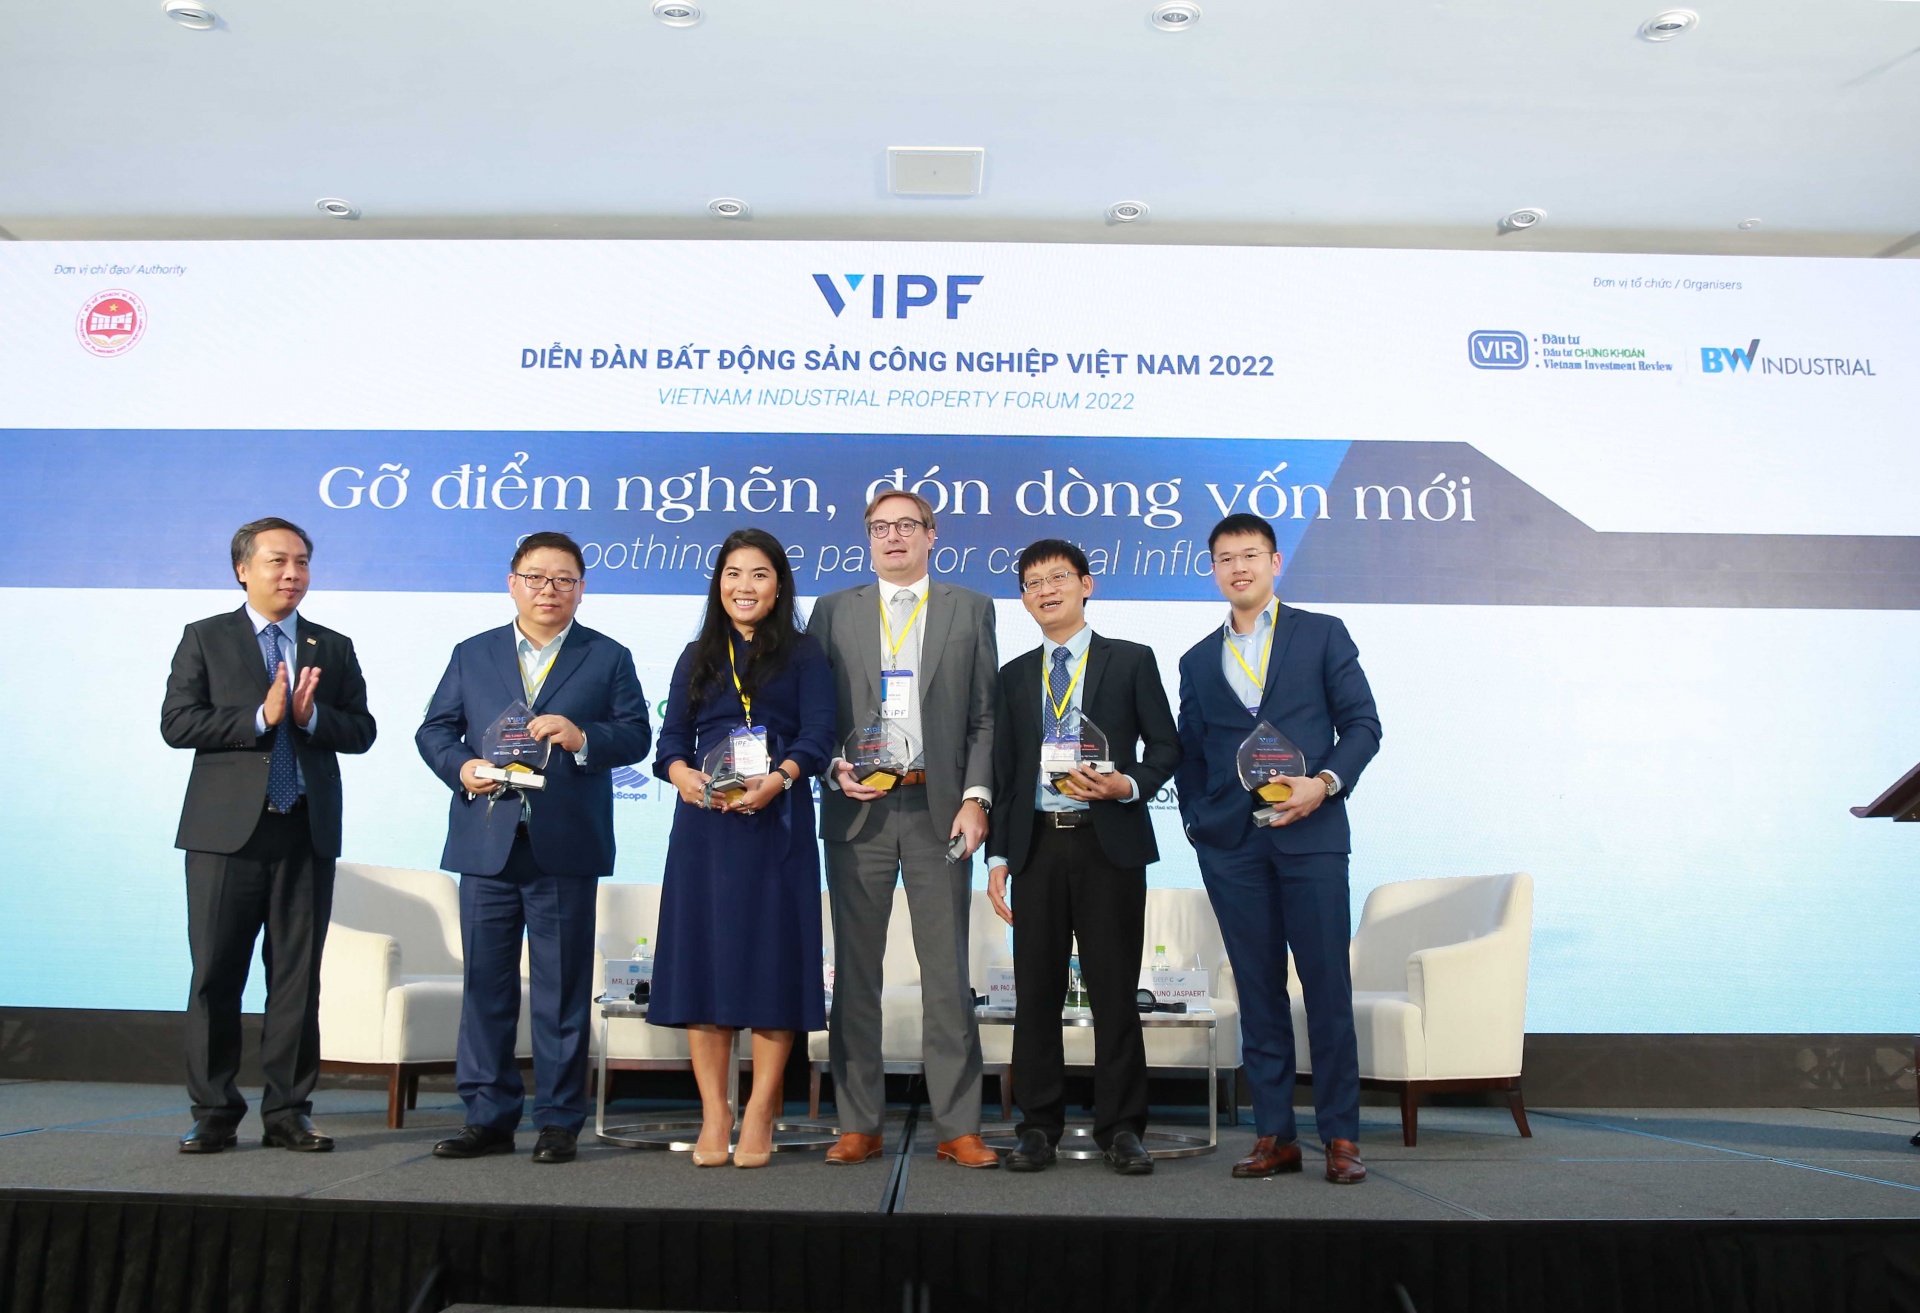 Investment flow drives Vietnam's industrial property